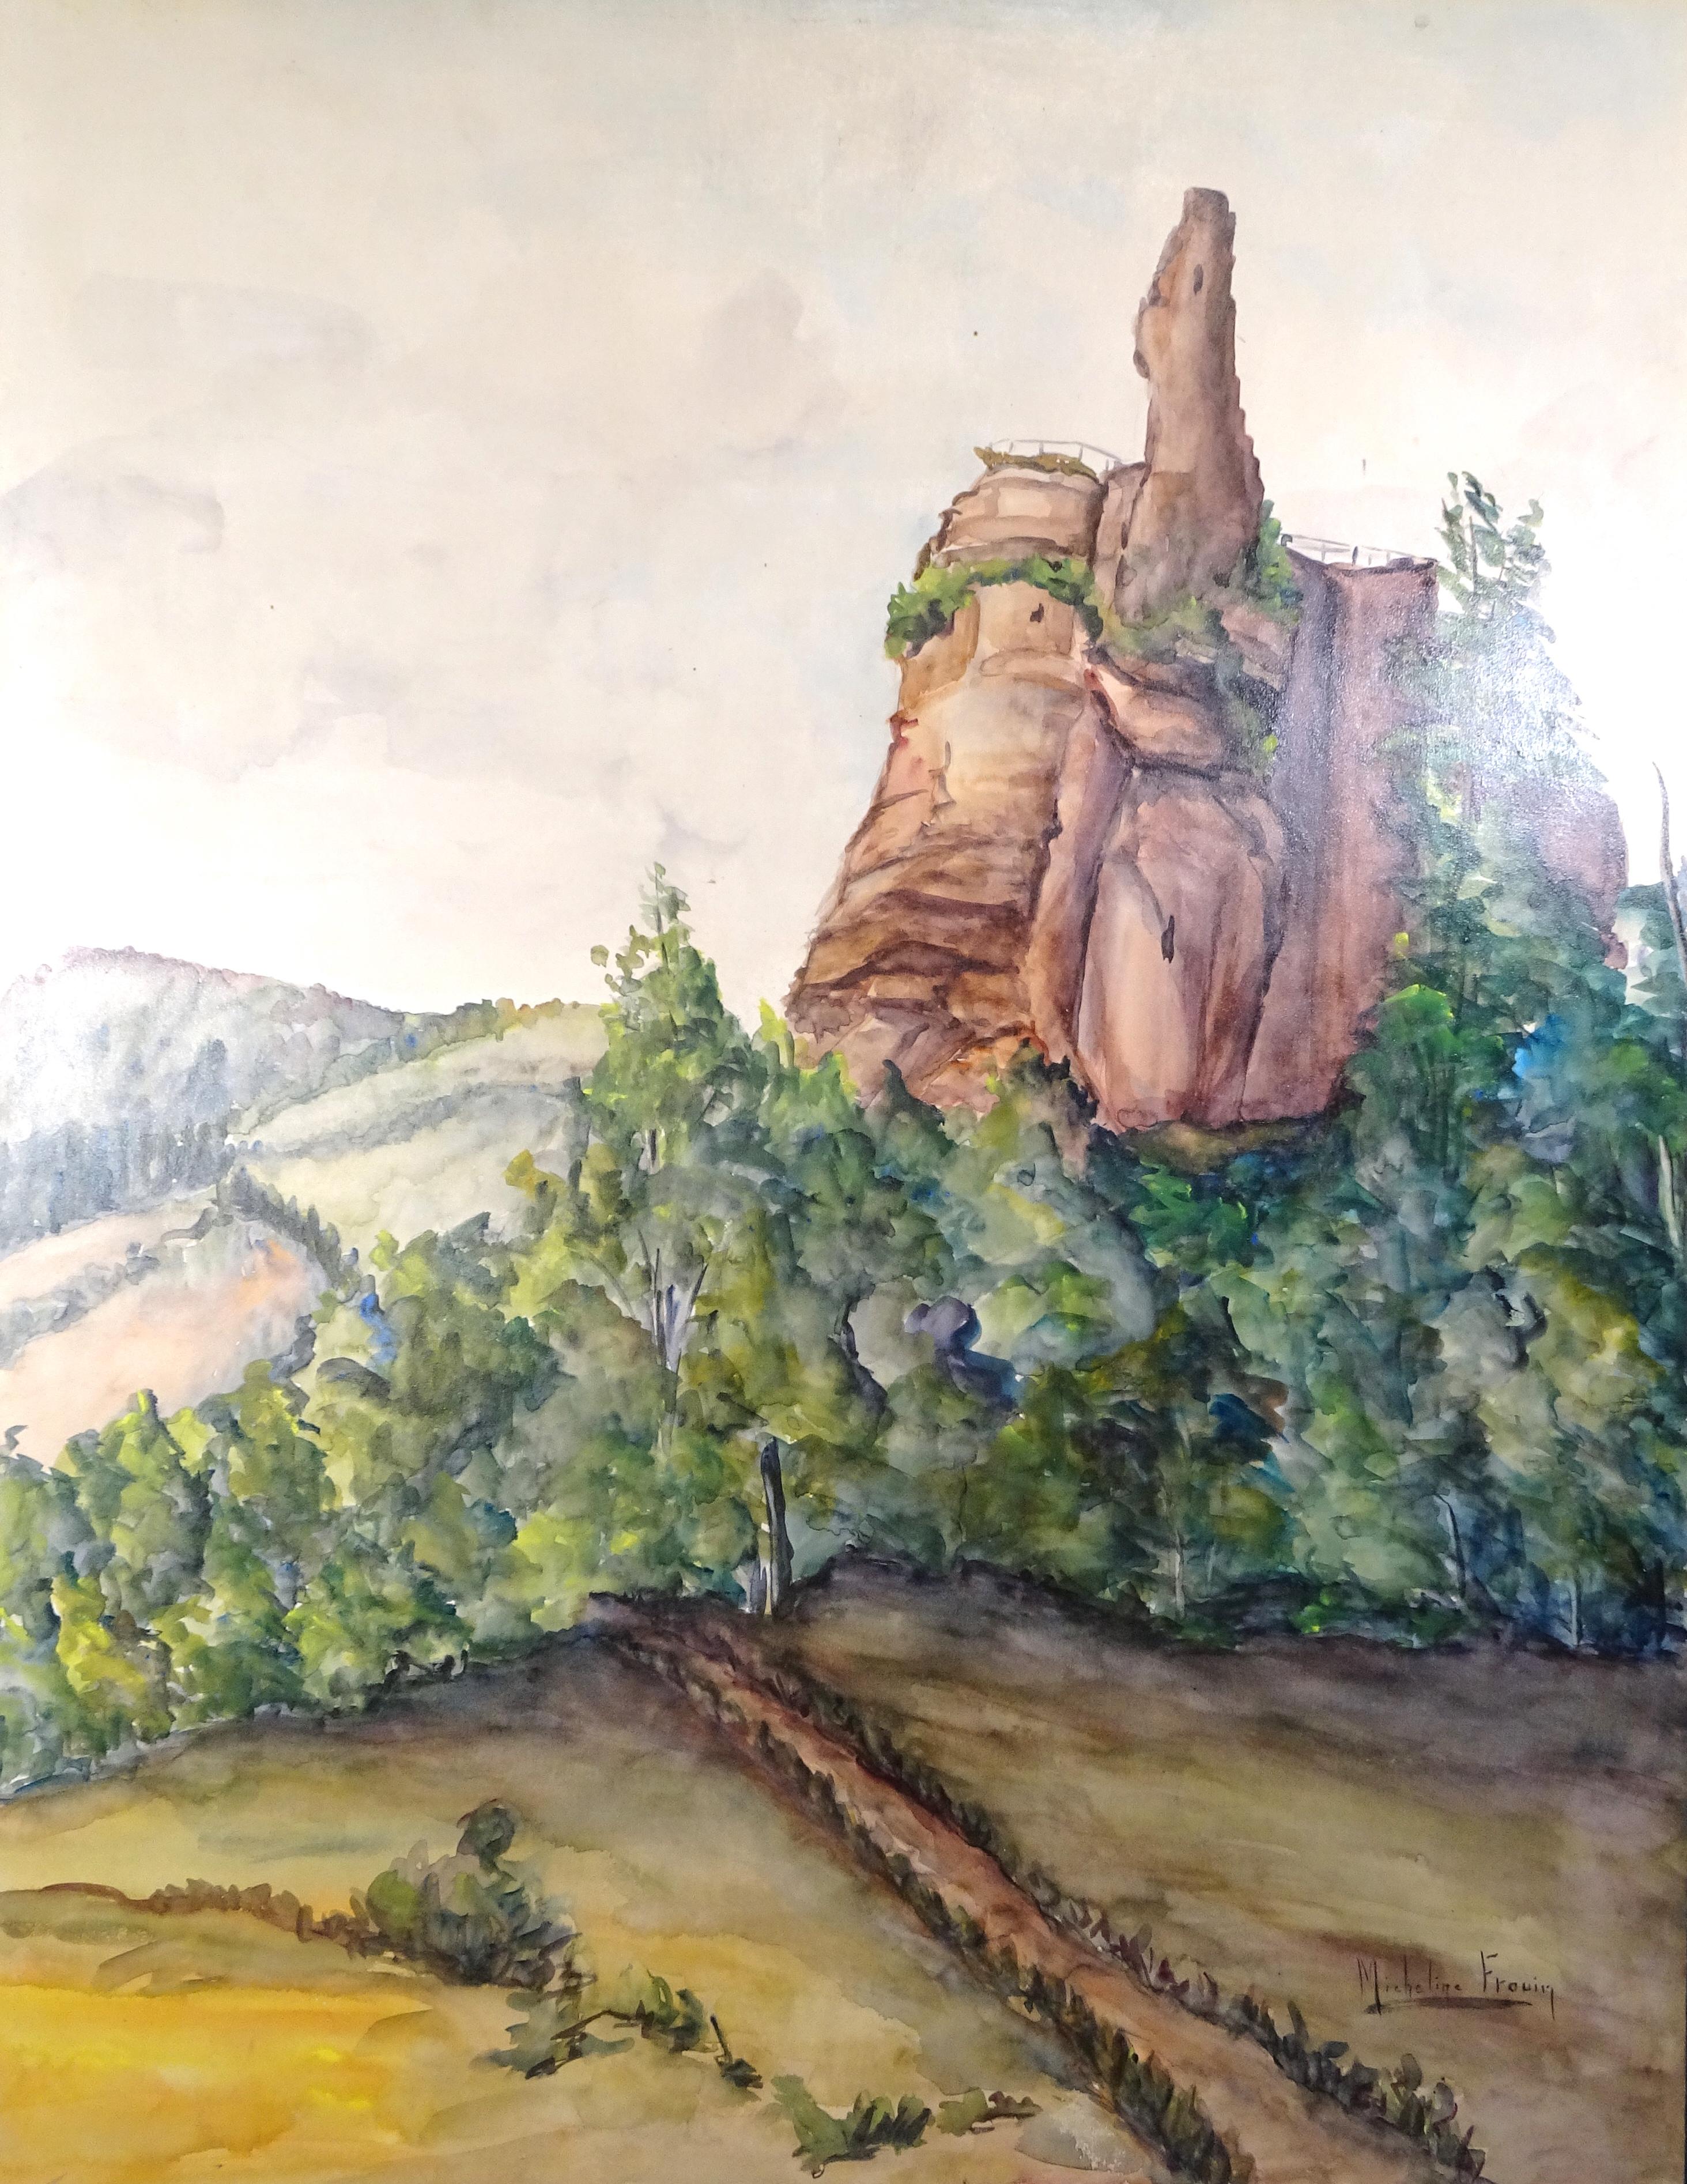 Paysage d'Alsace - Original Tempera and Watercolor on Paper by M. Frouin - Mixed Media Art by Micheline Frouin